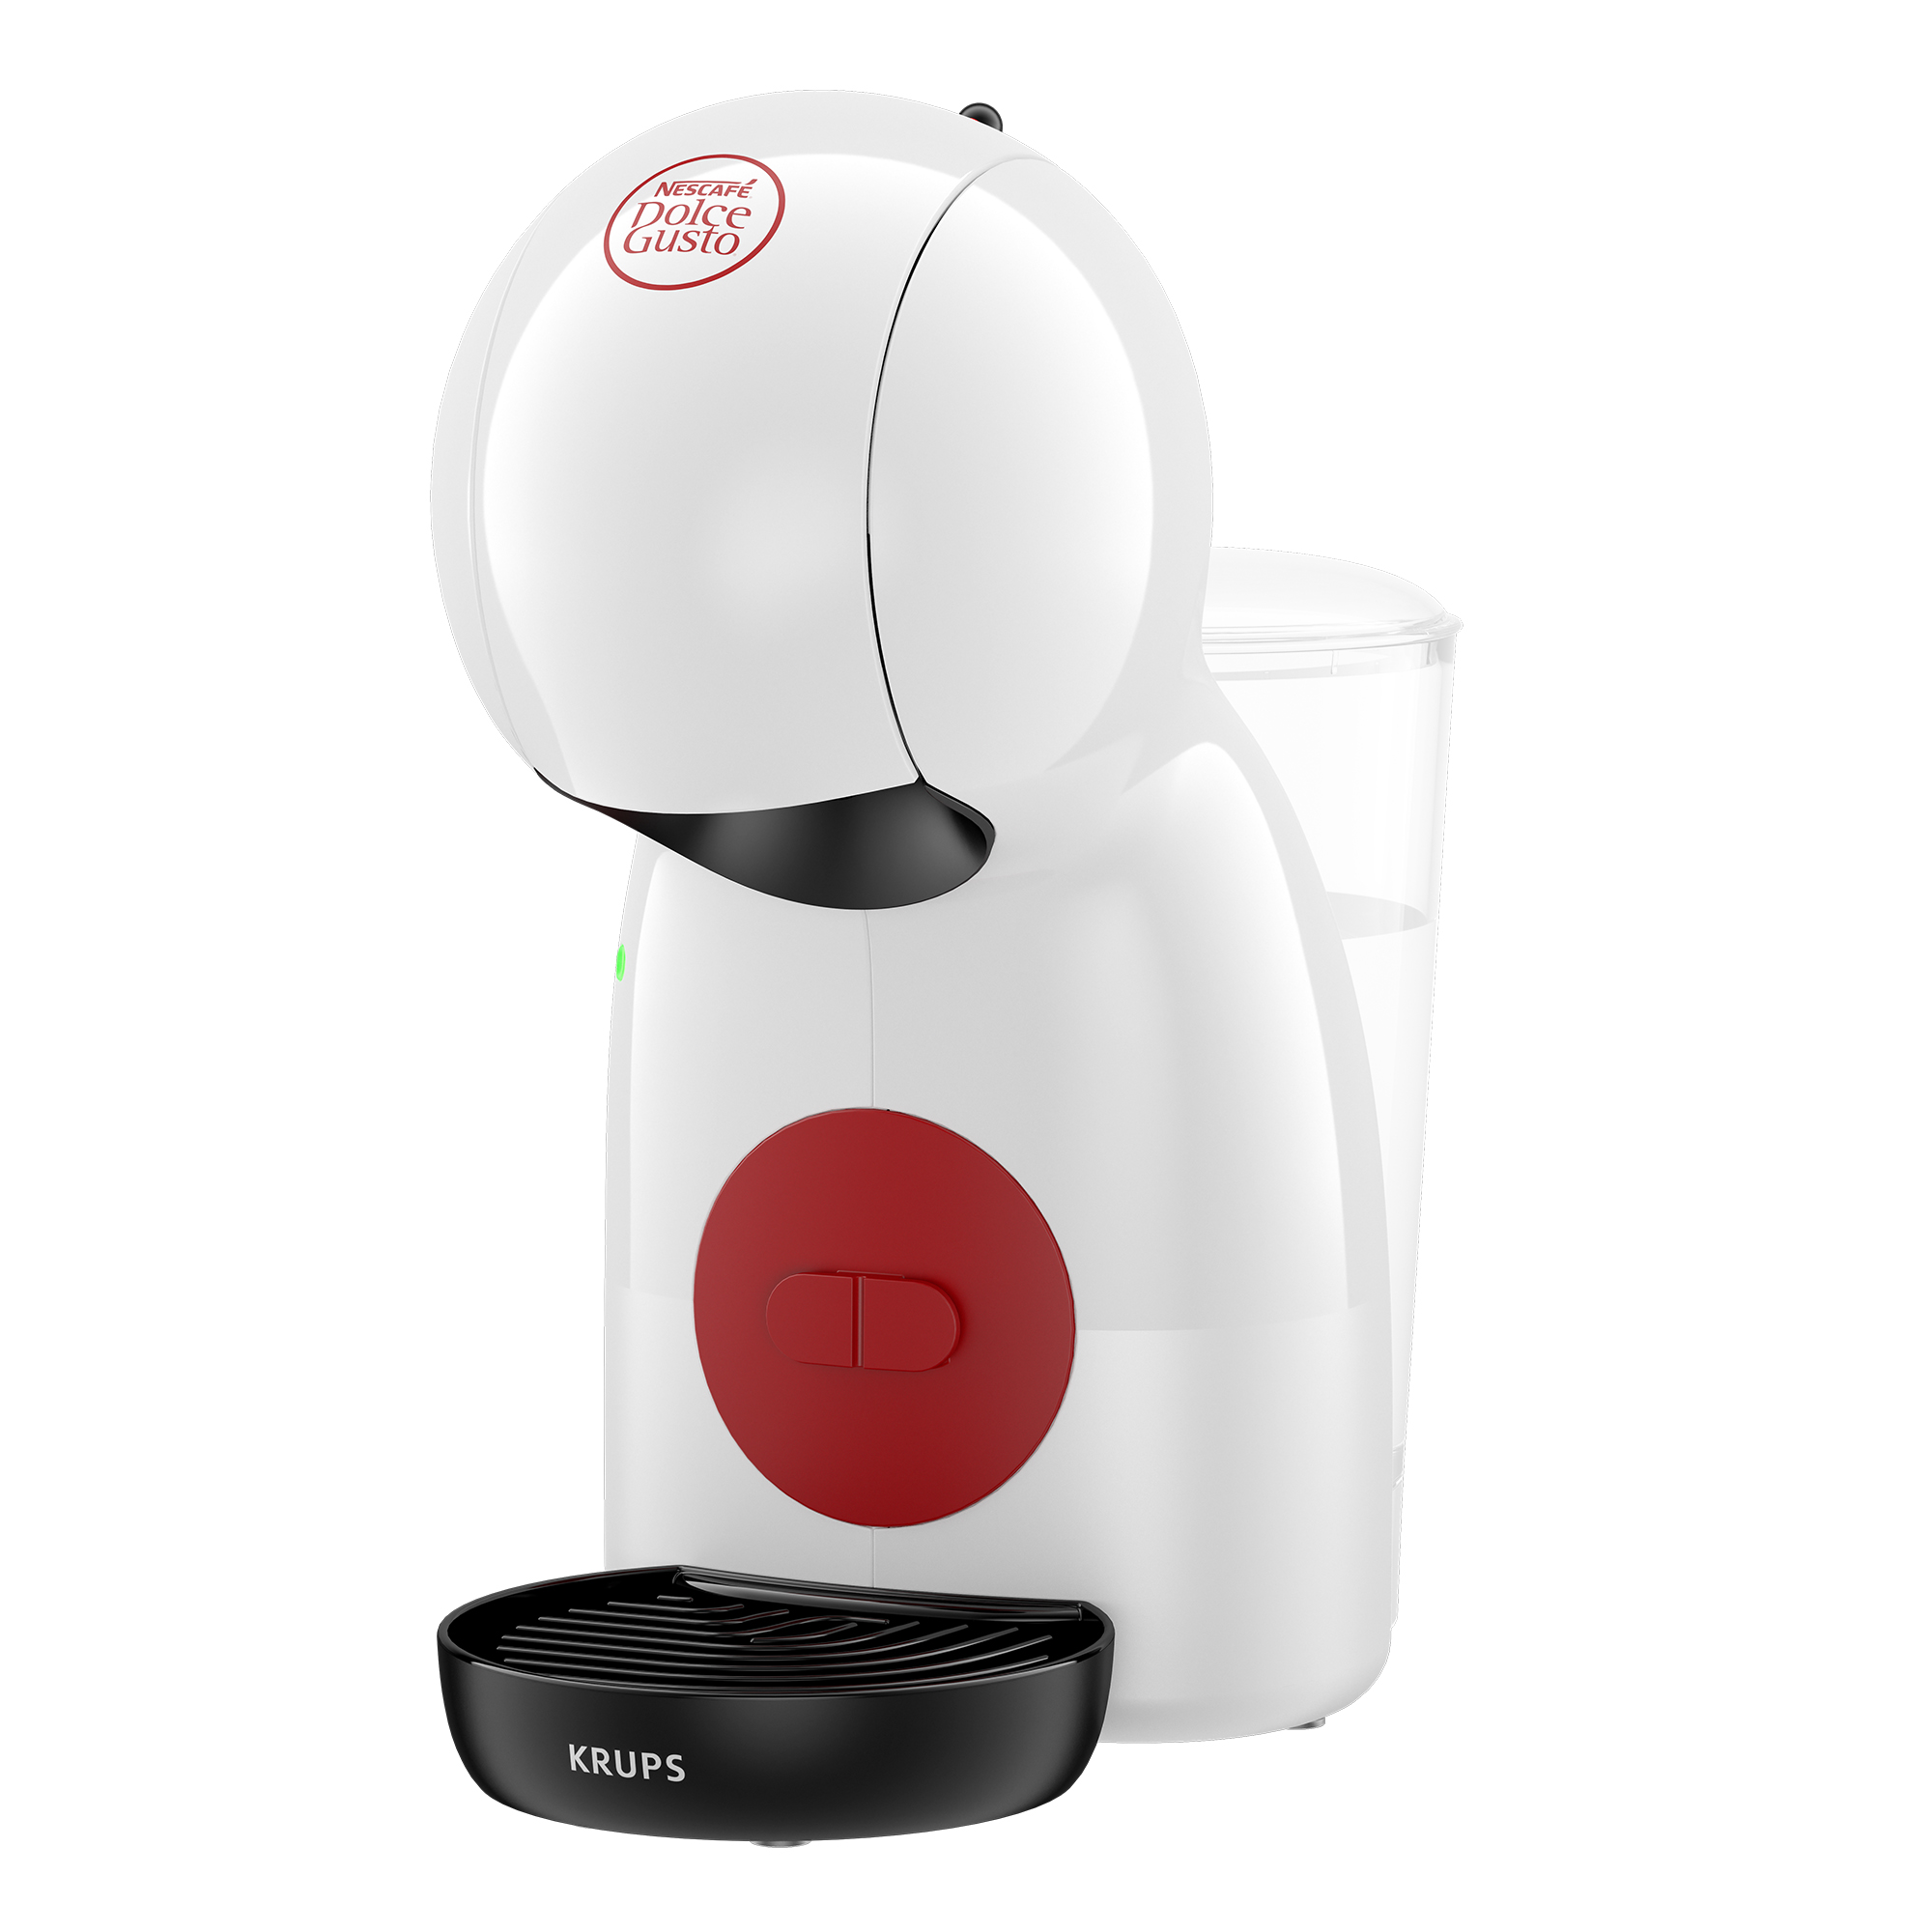 Cafetera Krups Dolce Gusto Piccolo Blanca 